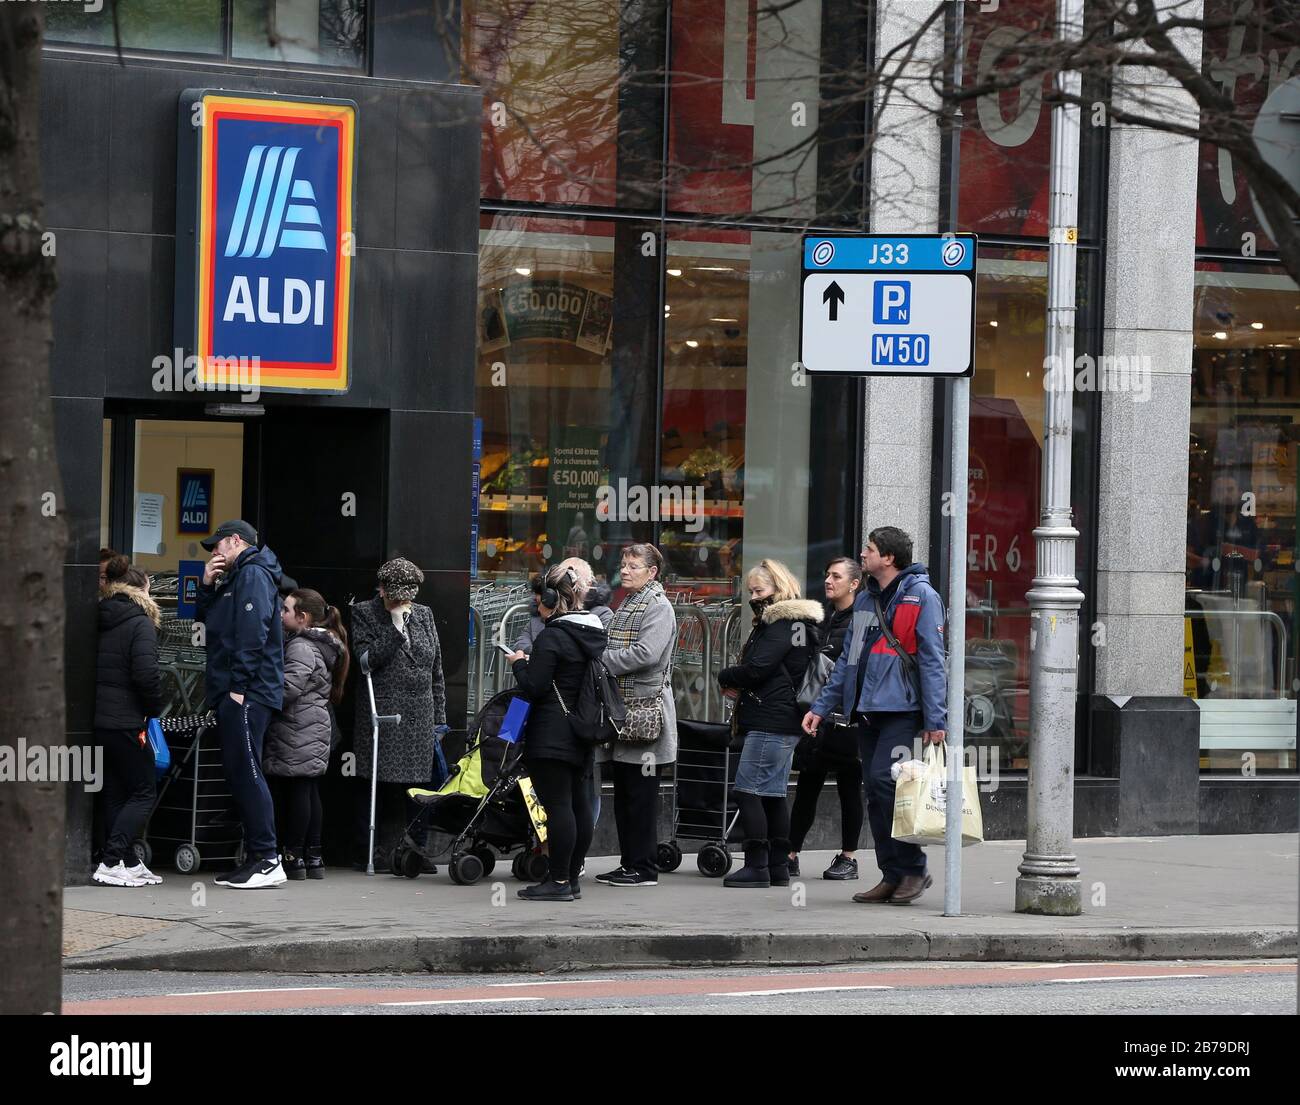 14/03/2020. Covid-19 Pandemic (Coronavirus) Ireland. A queue of people stand outside Aldi supermarket in Dublin as panic buying sets in. As of last night there were 90 cases of Covid-19, and one death confirmed in the Republic of Ireland. All major outdoor sporting events involving more than 500 people and indoor events of any kind with more than 100 people have been cancelled. All schools universities, childcare facilities, museums and art galleries have been closed. Most churches have cancelled services.  Photo: Sam Boal/Rollingnews.ie Stock Photo